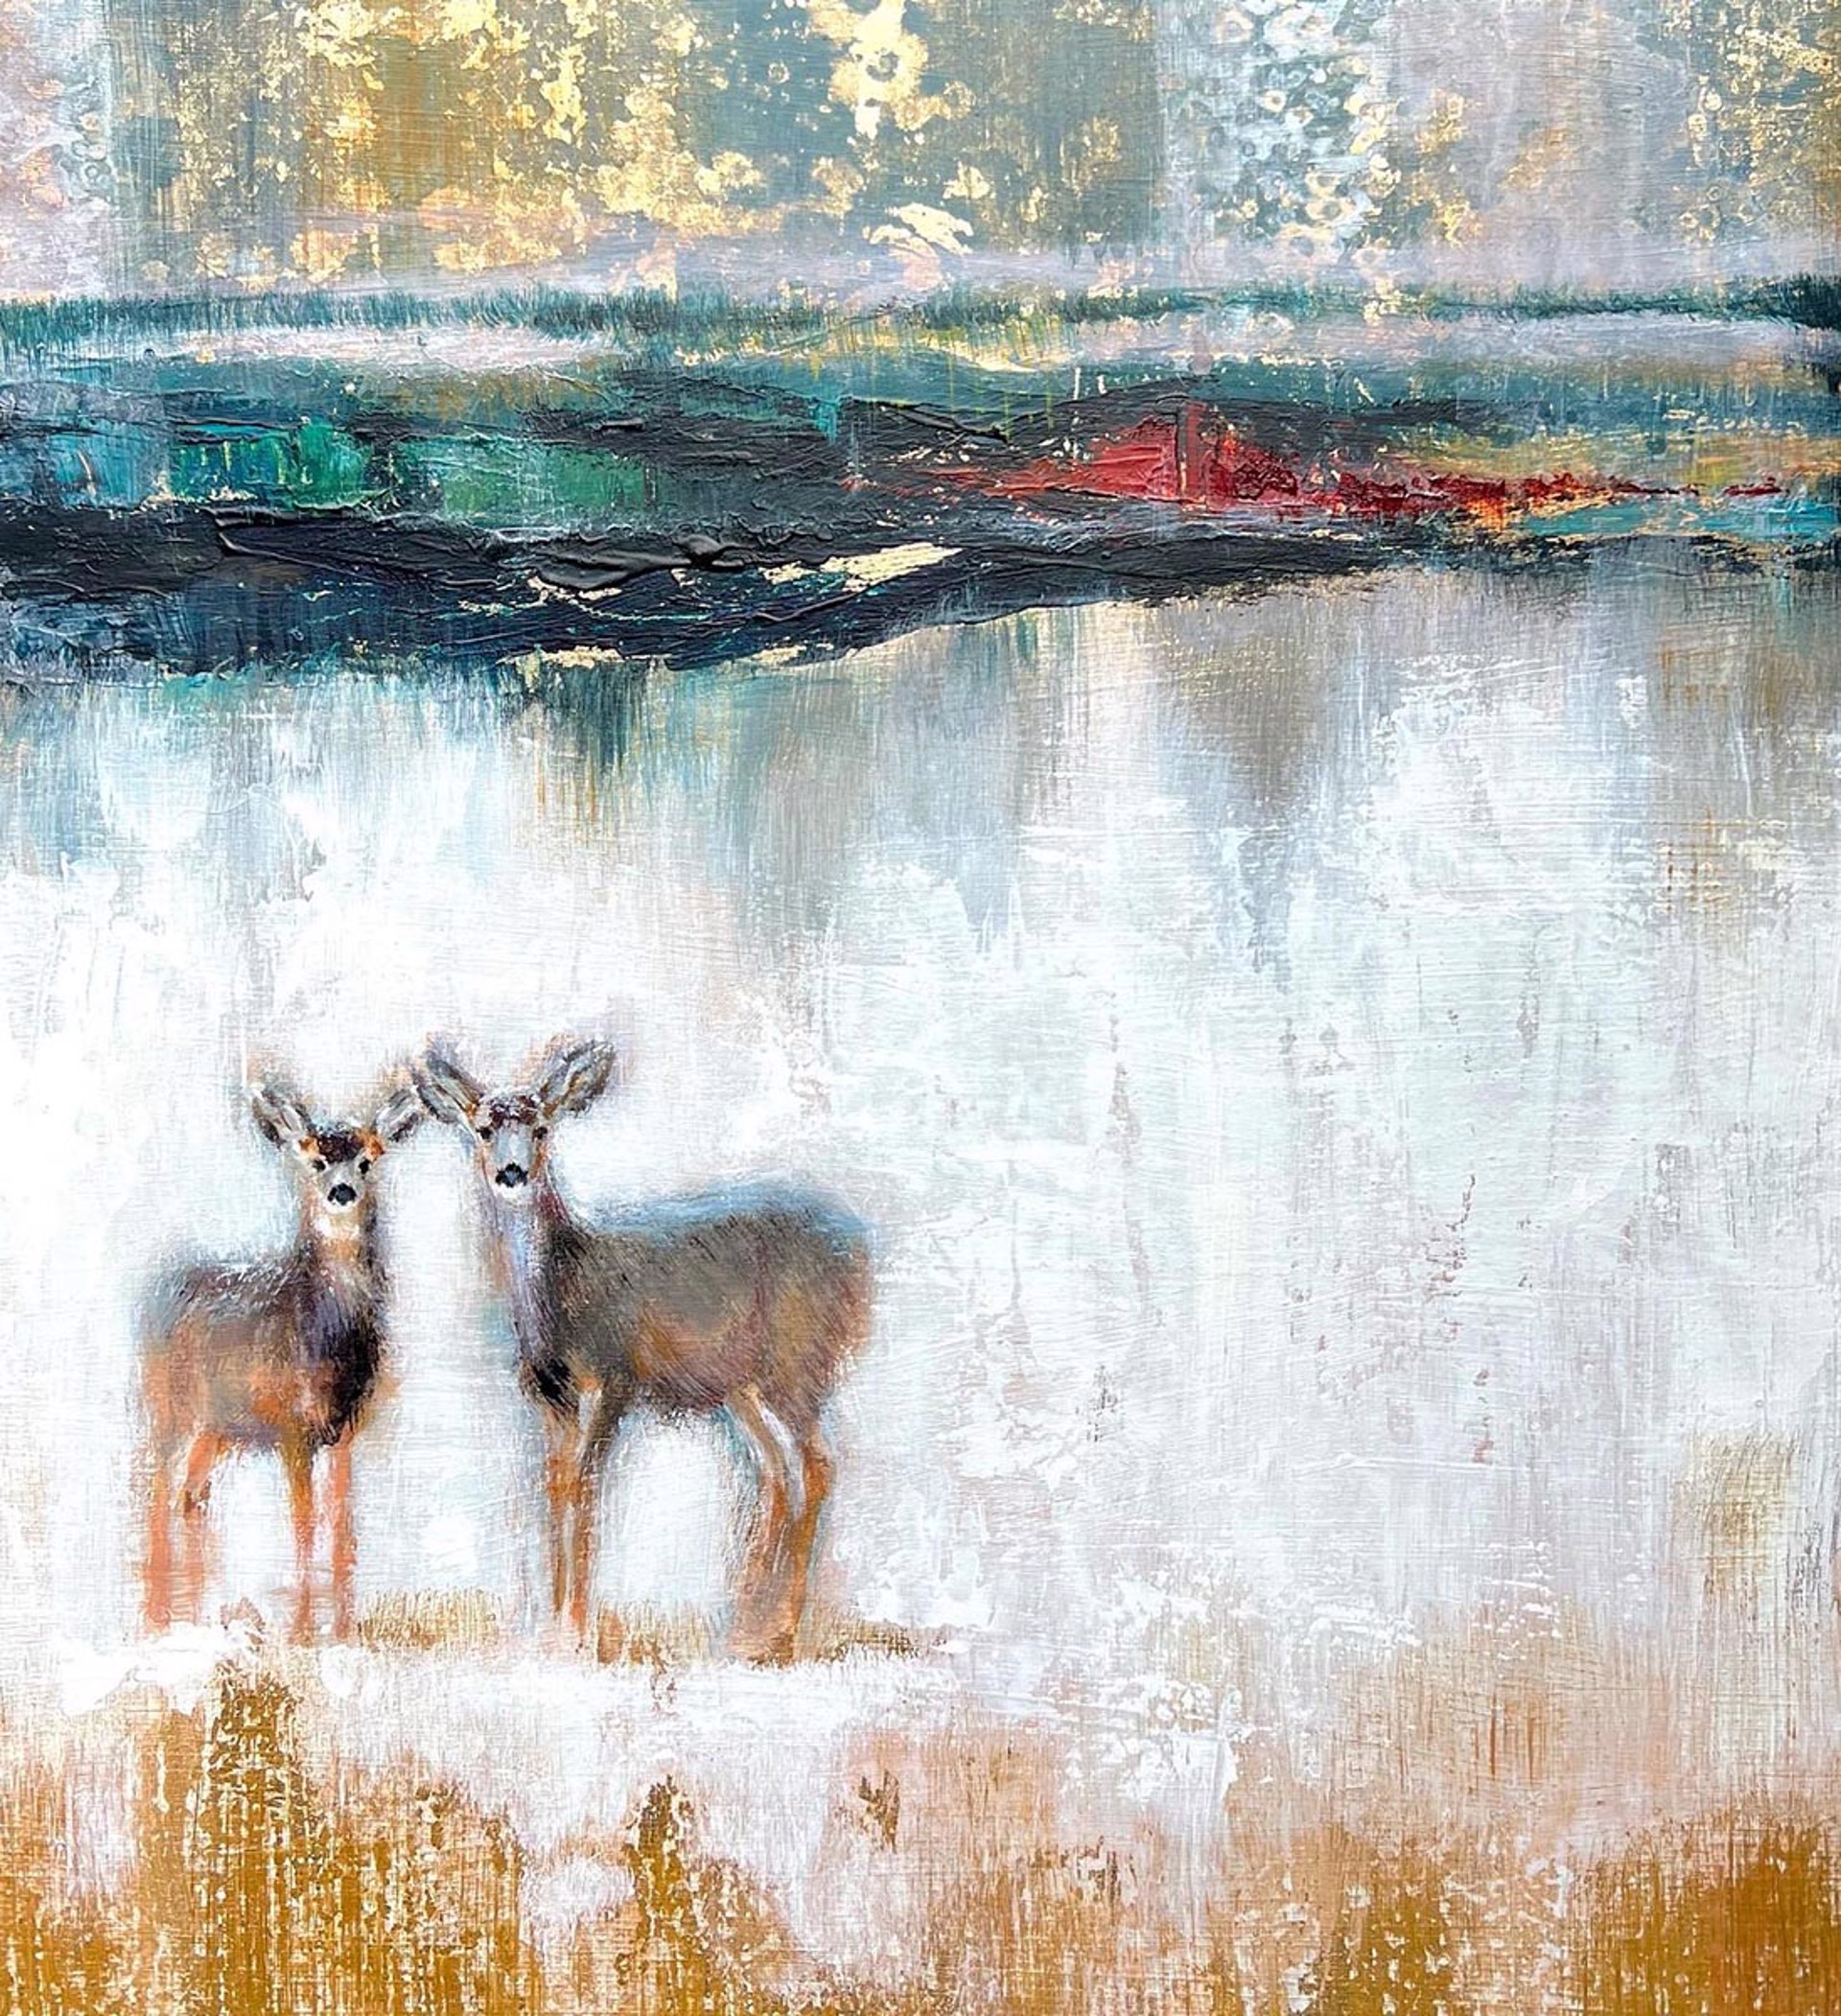 Original Mixed Media Painting Featuring Two Deer On Winter Landscape With Gold Leaf Details